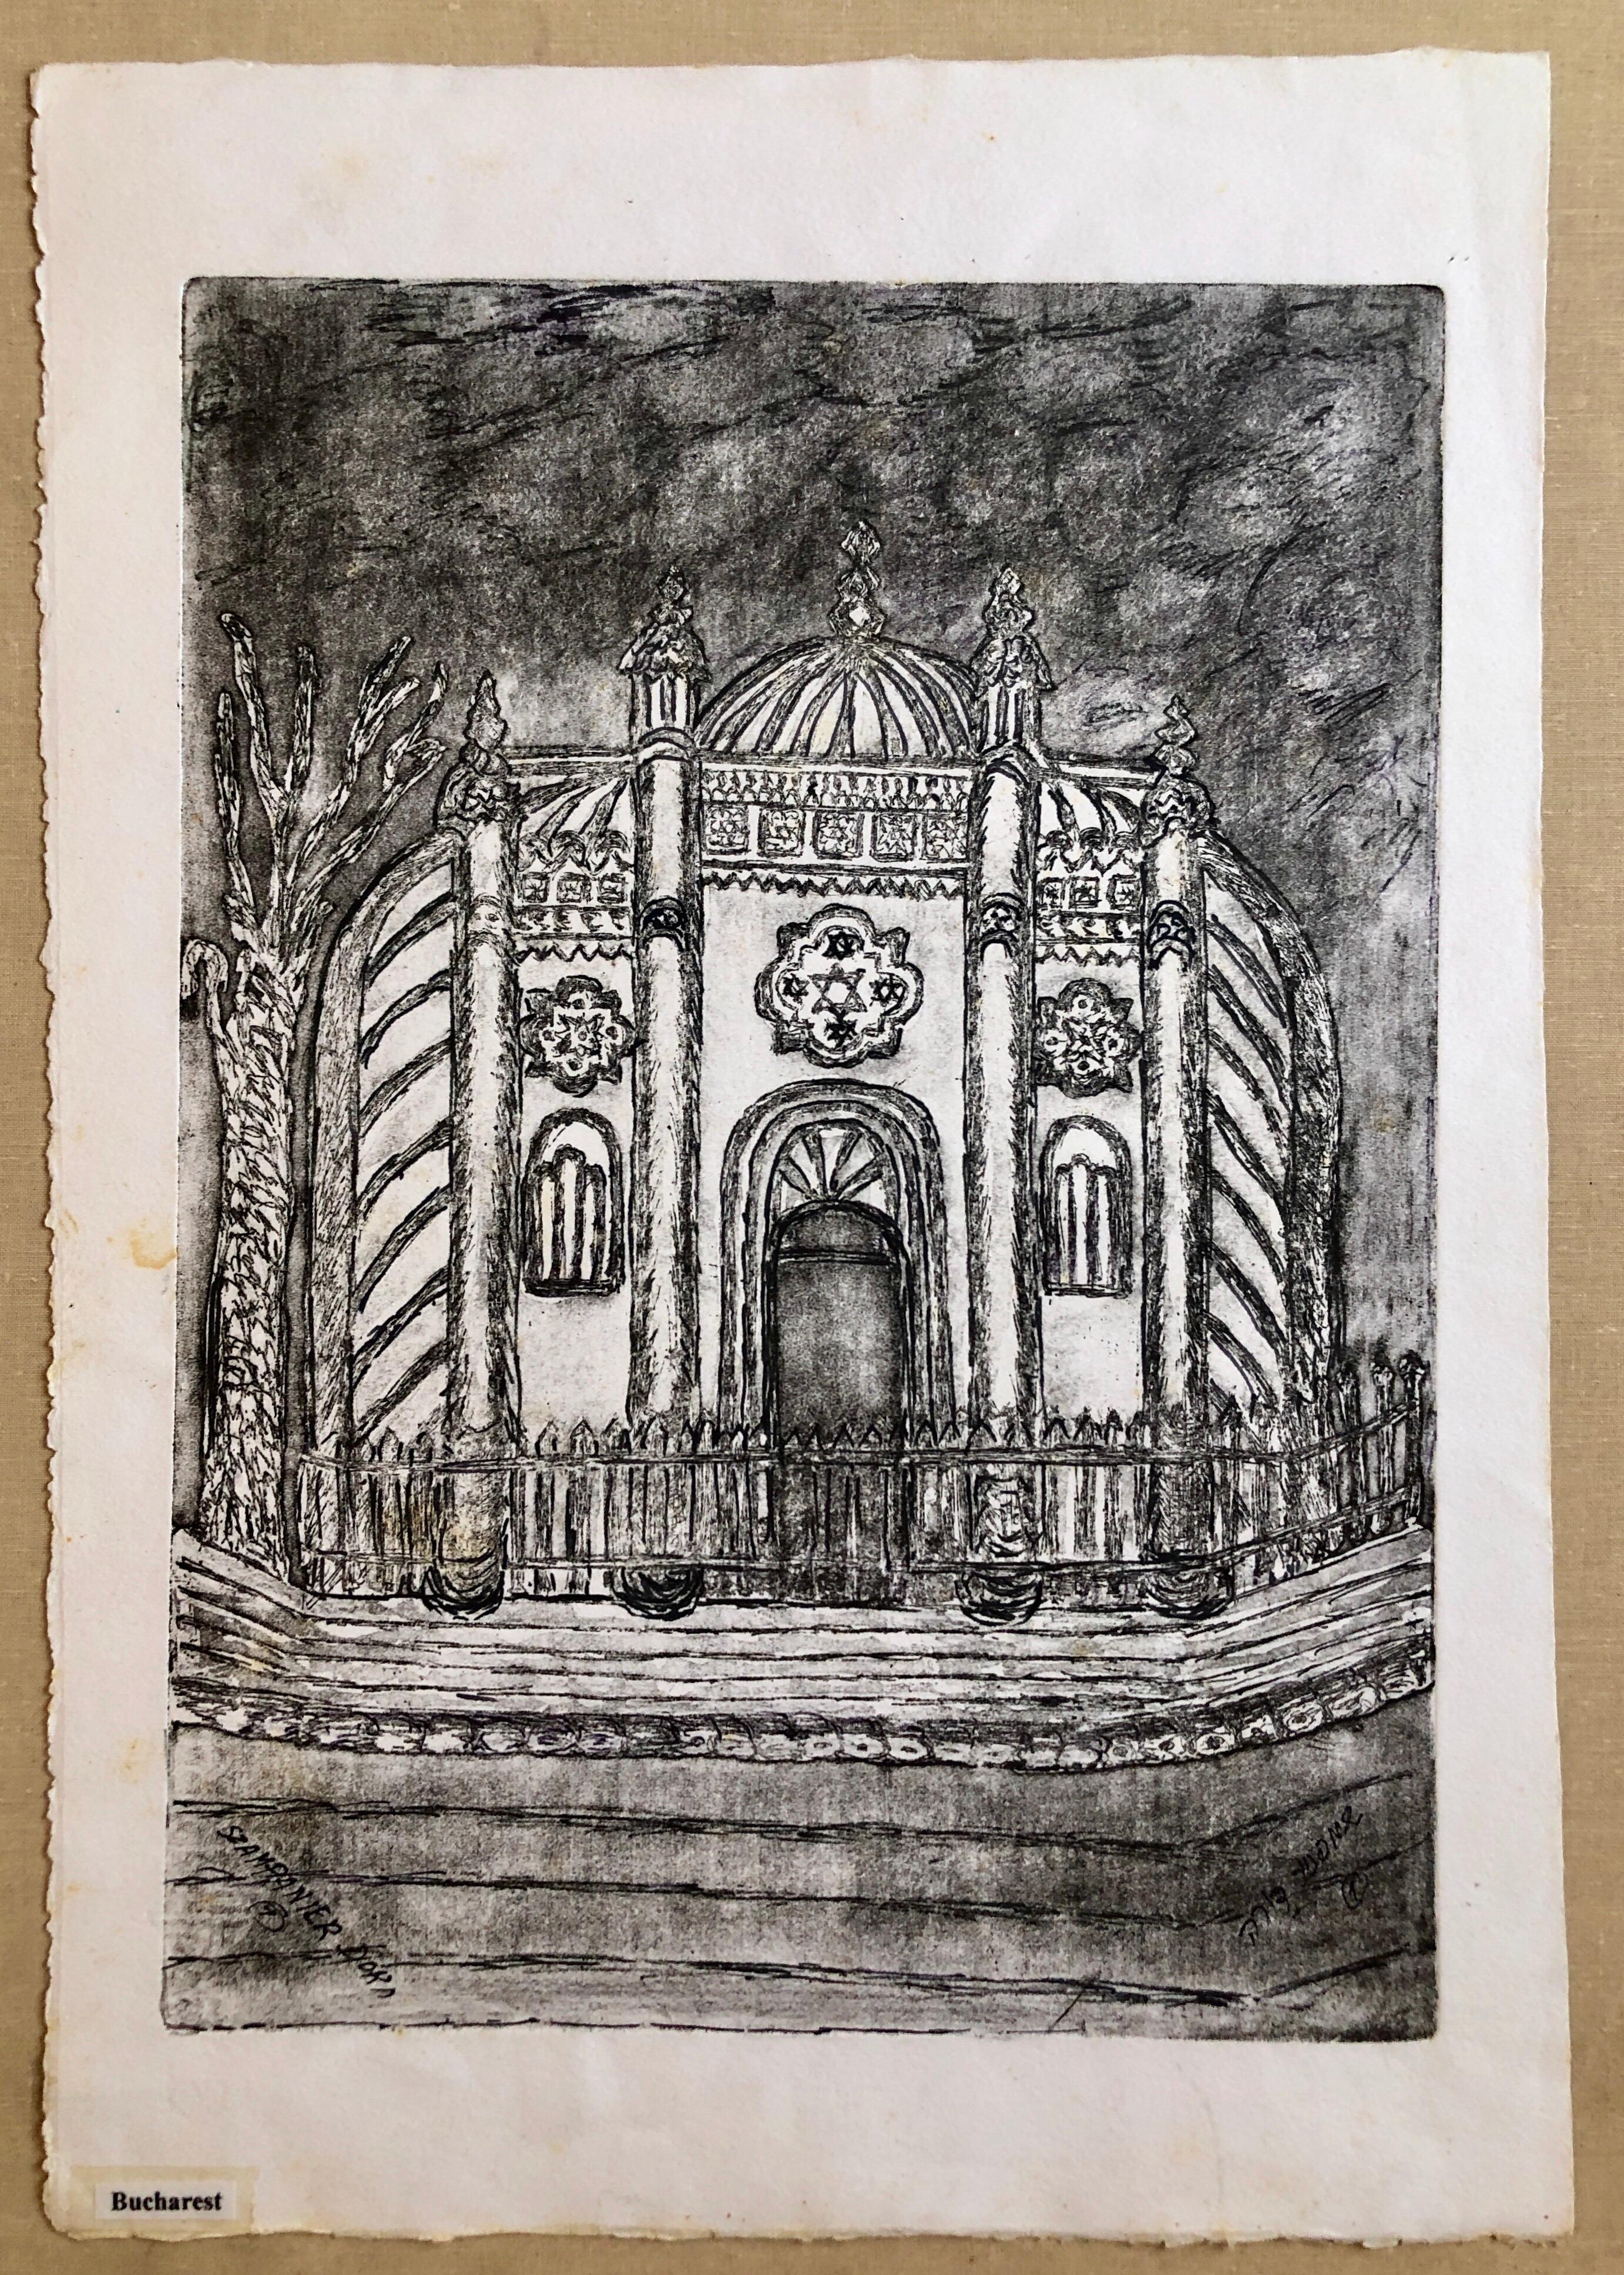 Etching of Synagogue, Jewish temple. From very rare small edition. Most are signed in Hebrew and /or English. some are marked AP some are numbered. please see photos.
Dora Szampanier (Shampanier, nee Mondschein) born 1922, a Jewish emigrant exiled